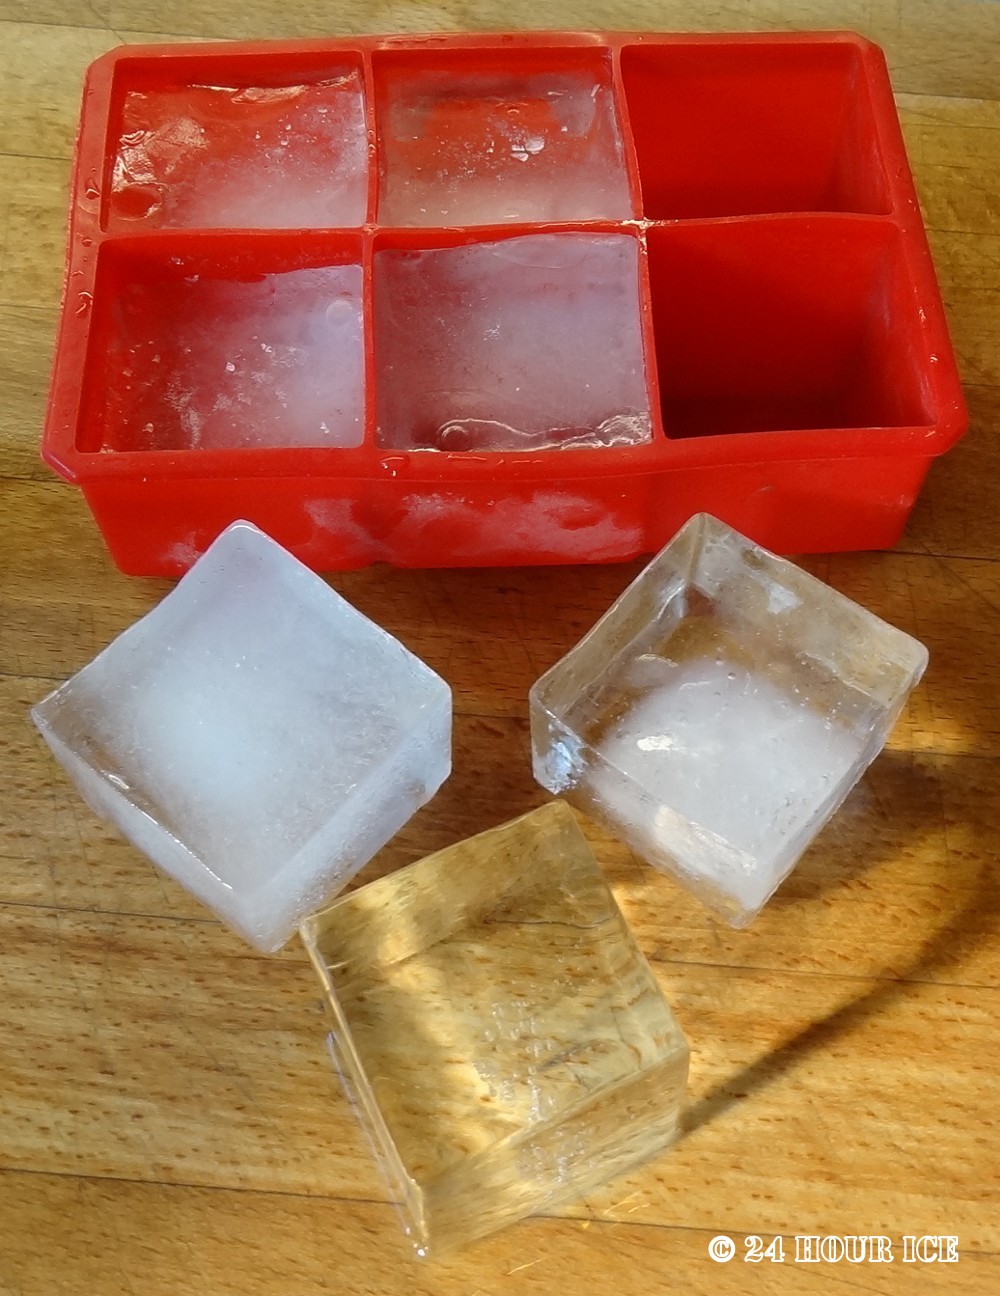 Home made ice cubes.